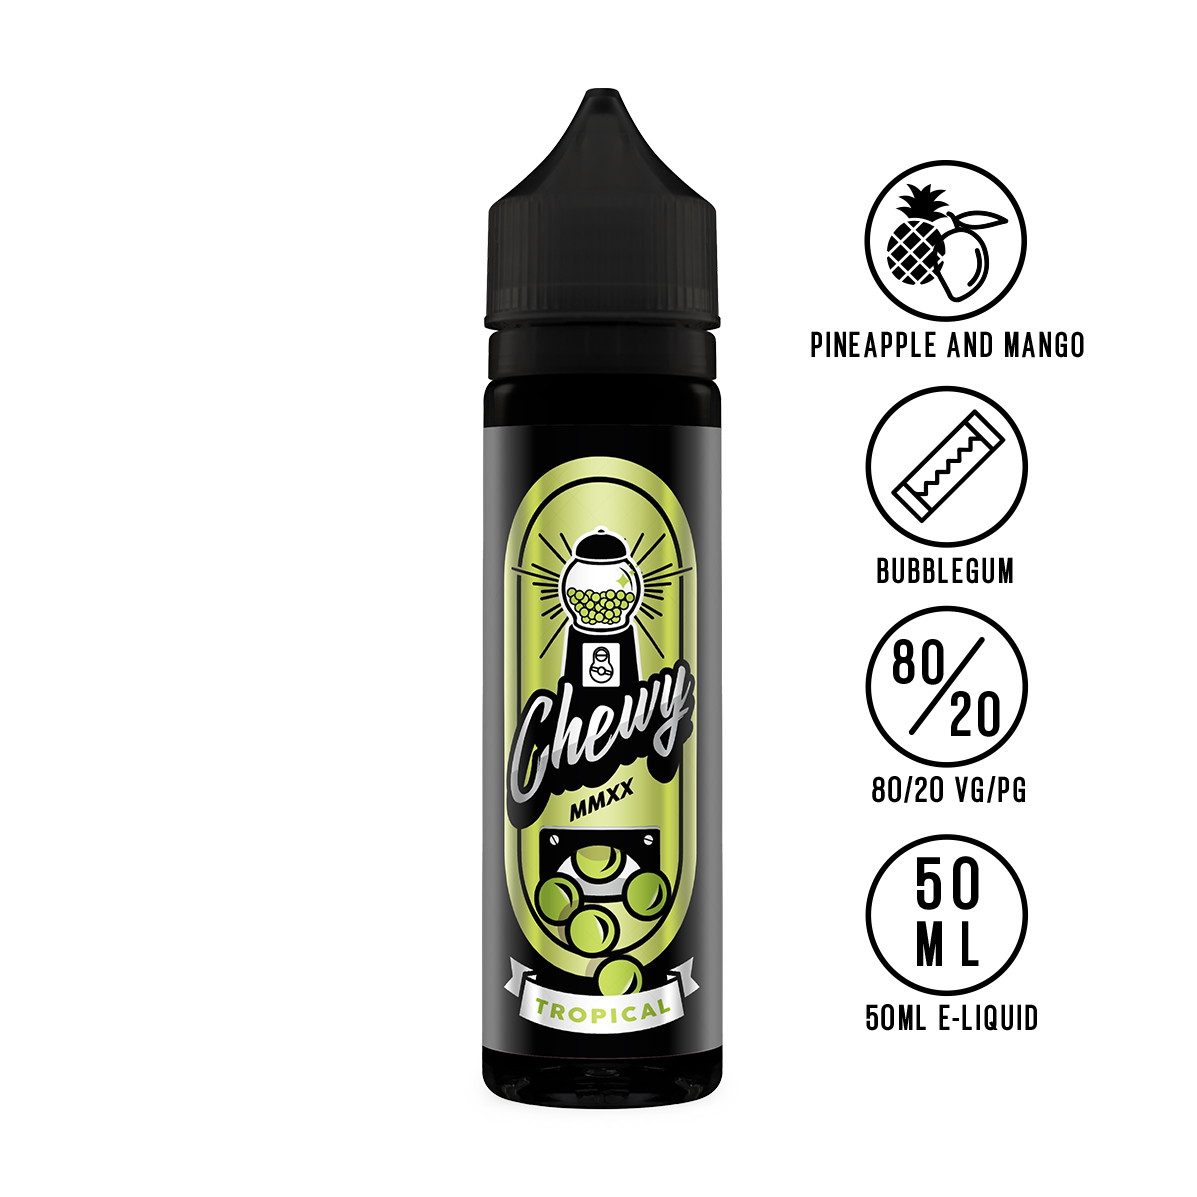 Chewy - Tropical Bubblegum 50ml - The Ace Of Vapez